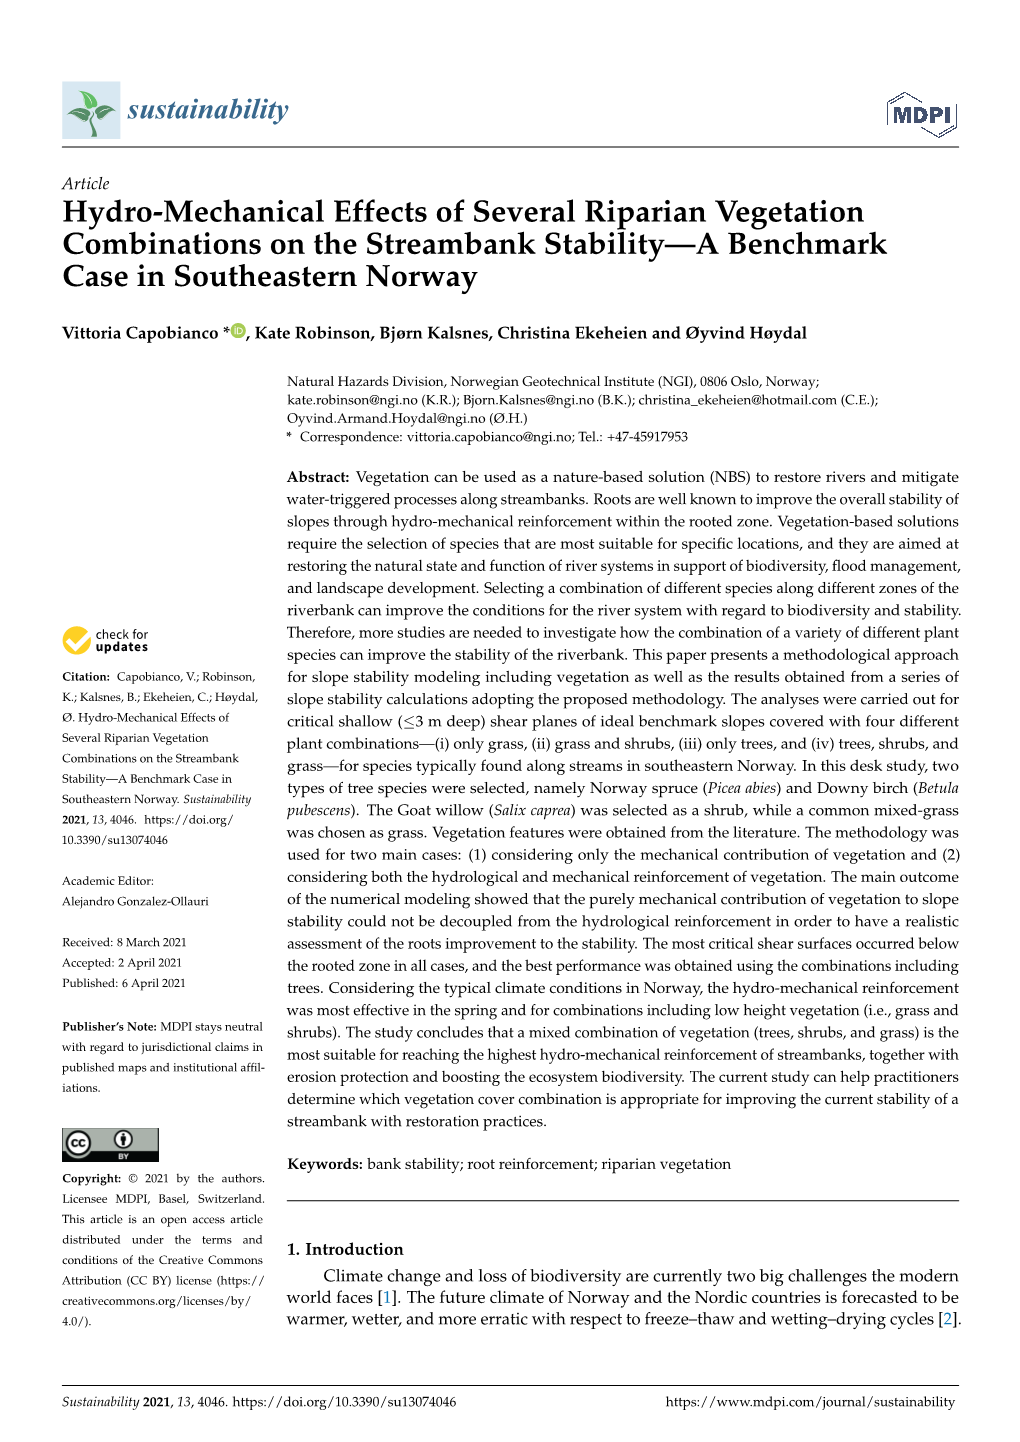 Hydro-Mechanical Effects of Several Riparian Vegetation Combinations on the Streambank Stability—A Benchmark Case in Southeastern Norway